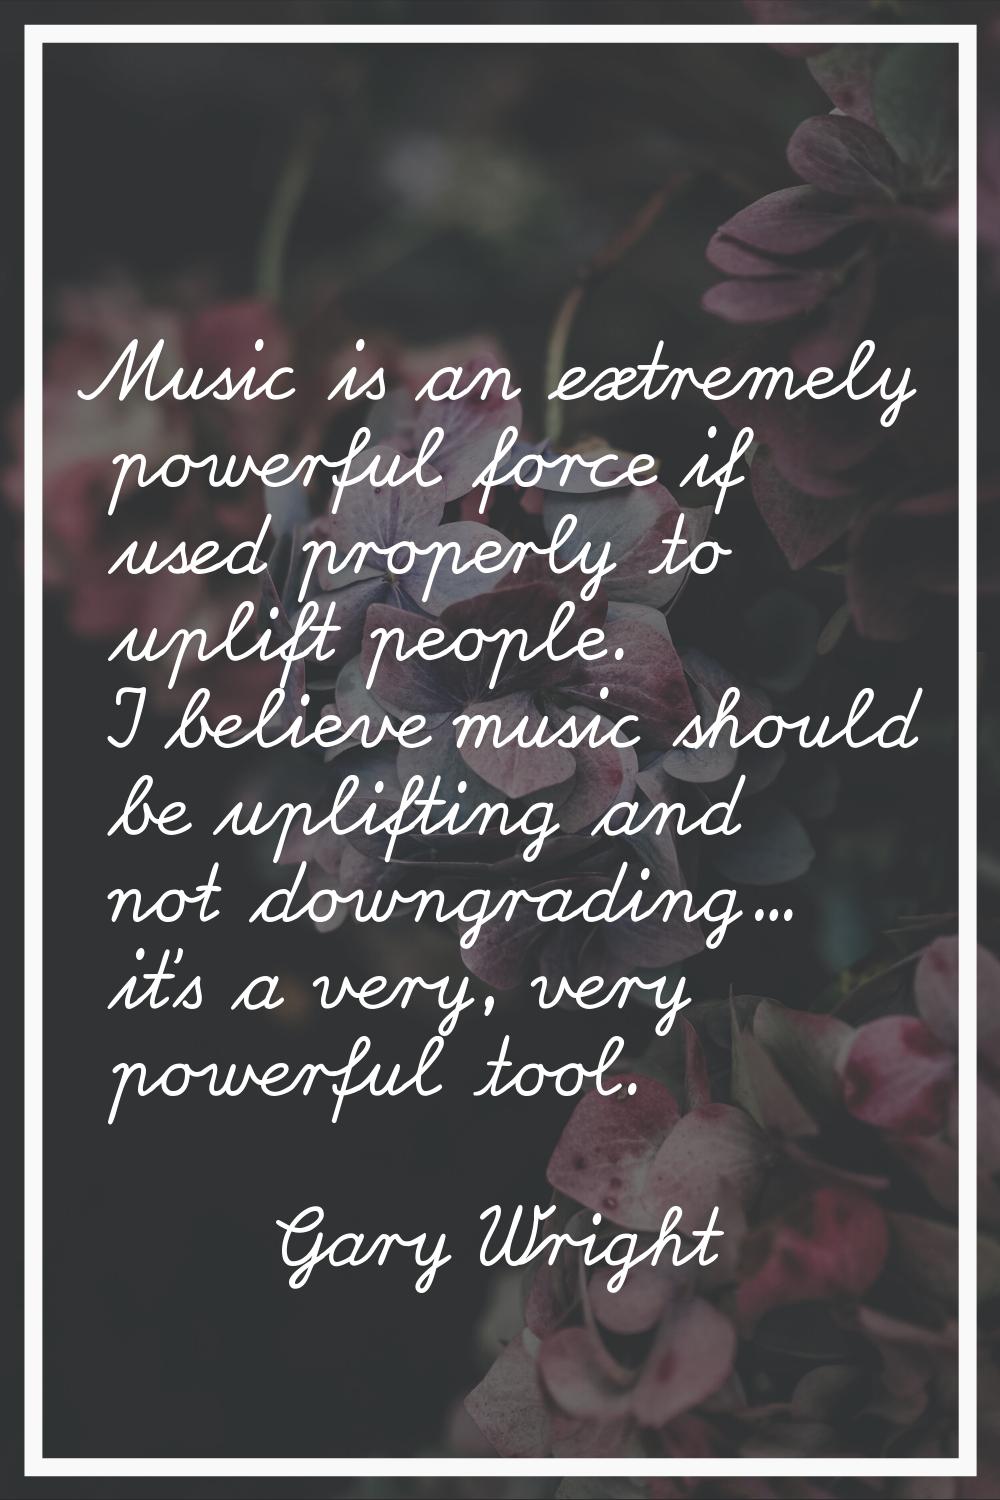 Music is an extremely powerful force if used properly to uplift people. I believe music should be u